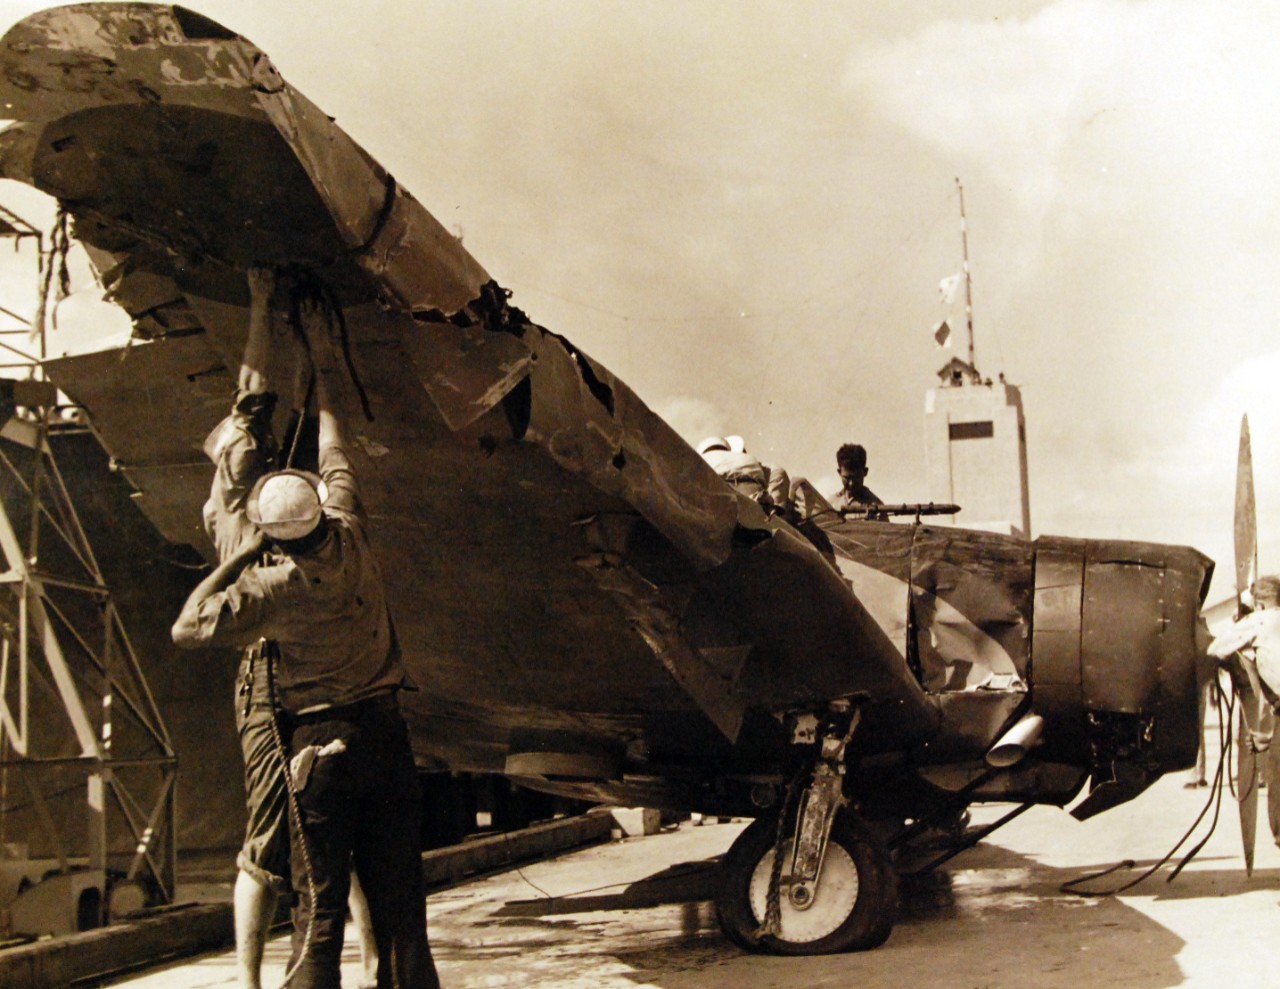 80-G-32441:  Japanese Attack on Pearl Harbor, December 7, 1941.  Damaged Japanese Navy Type 99 Carrier Bombers (Vals) at Pearl Harbor.  This plane was from Japanese aircraft carrier Kaga. Official U.S. Navy photograph, now in the collections of the National Archives.     (9/15/15).